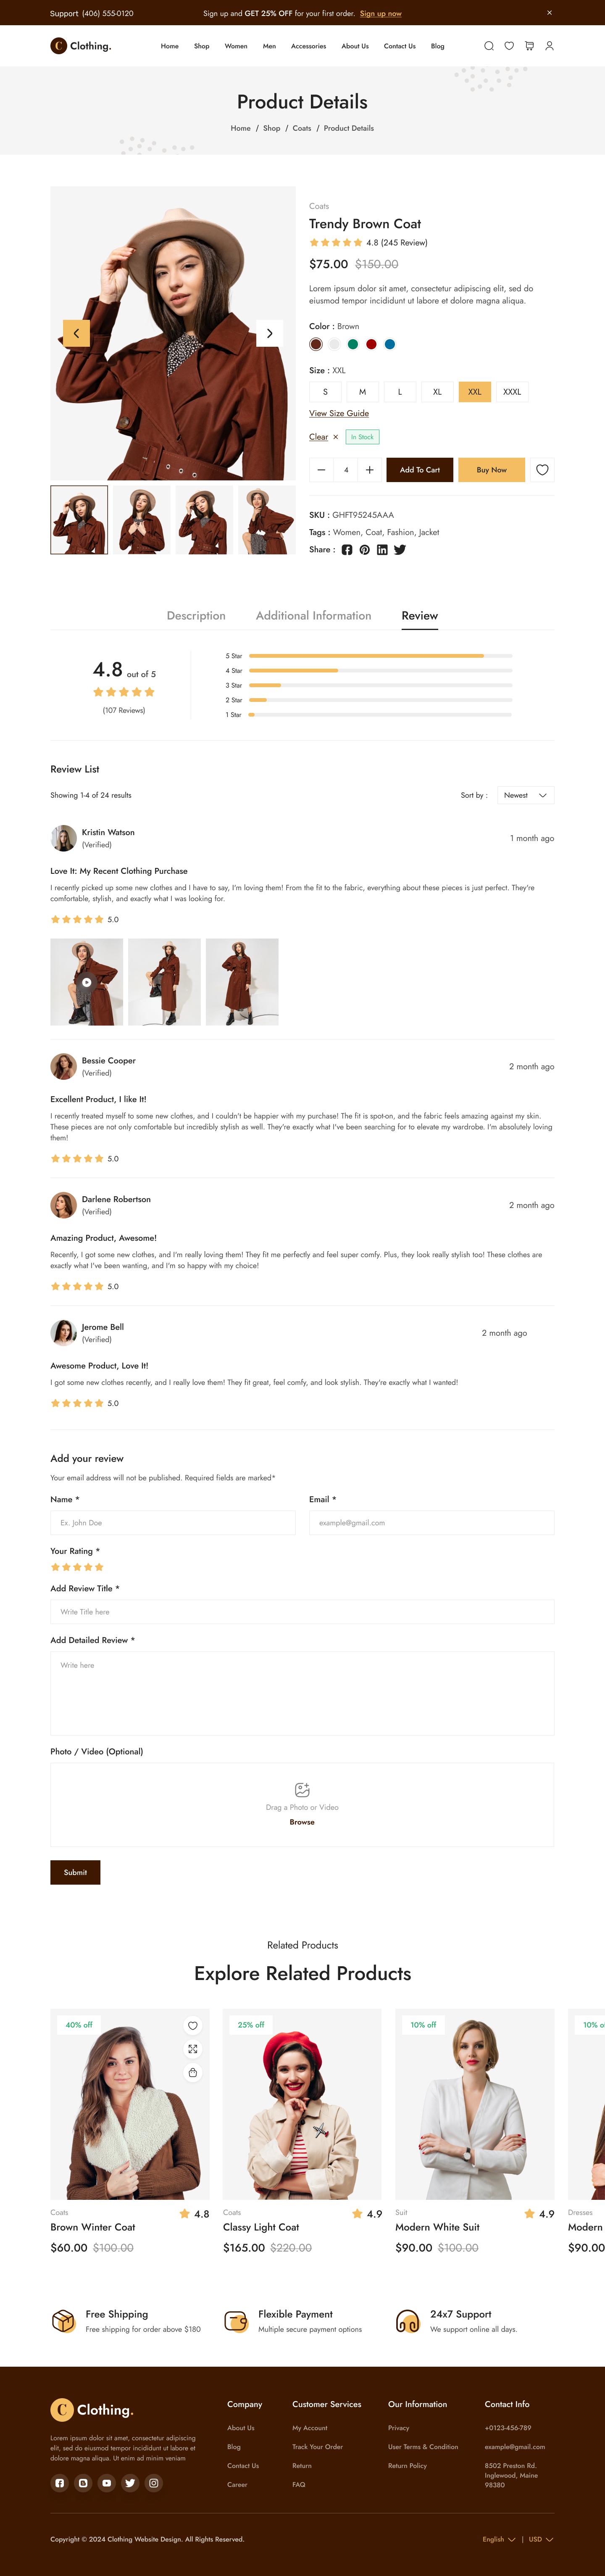 Clothing Store Website  UI UX Product Review tab Details Page Design